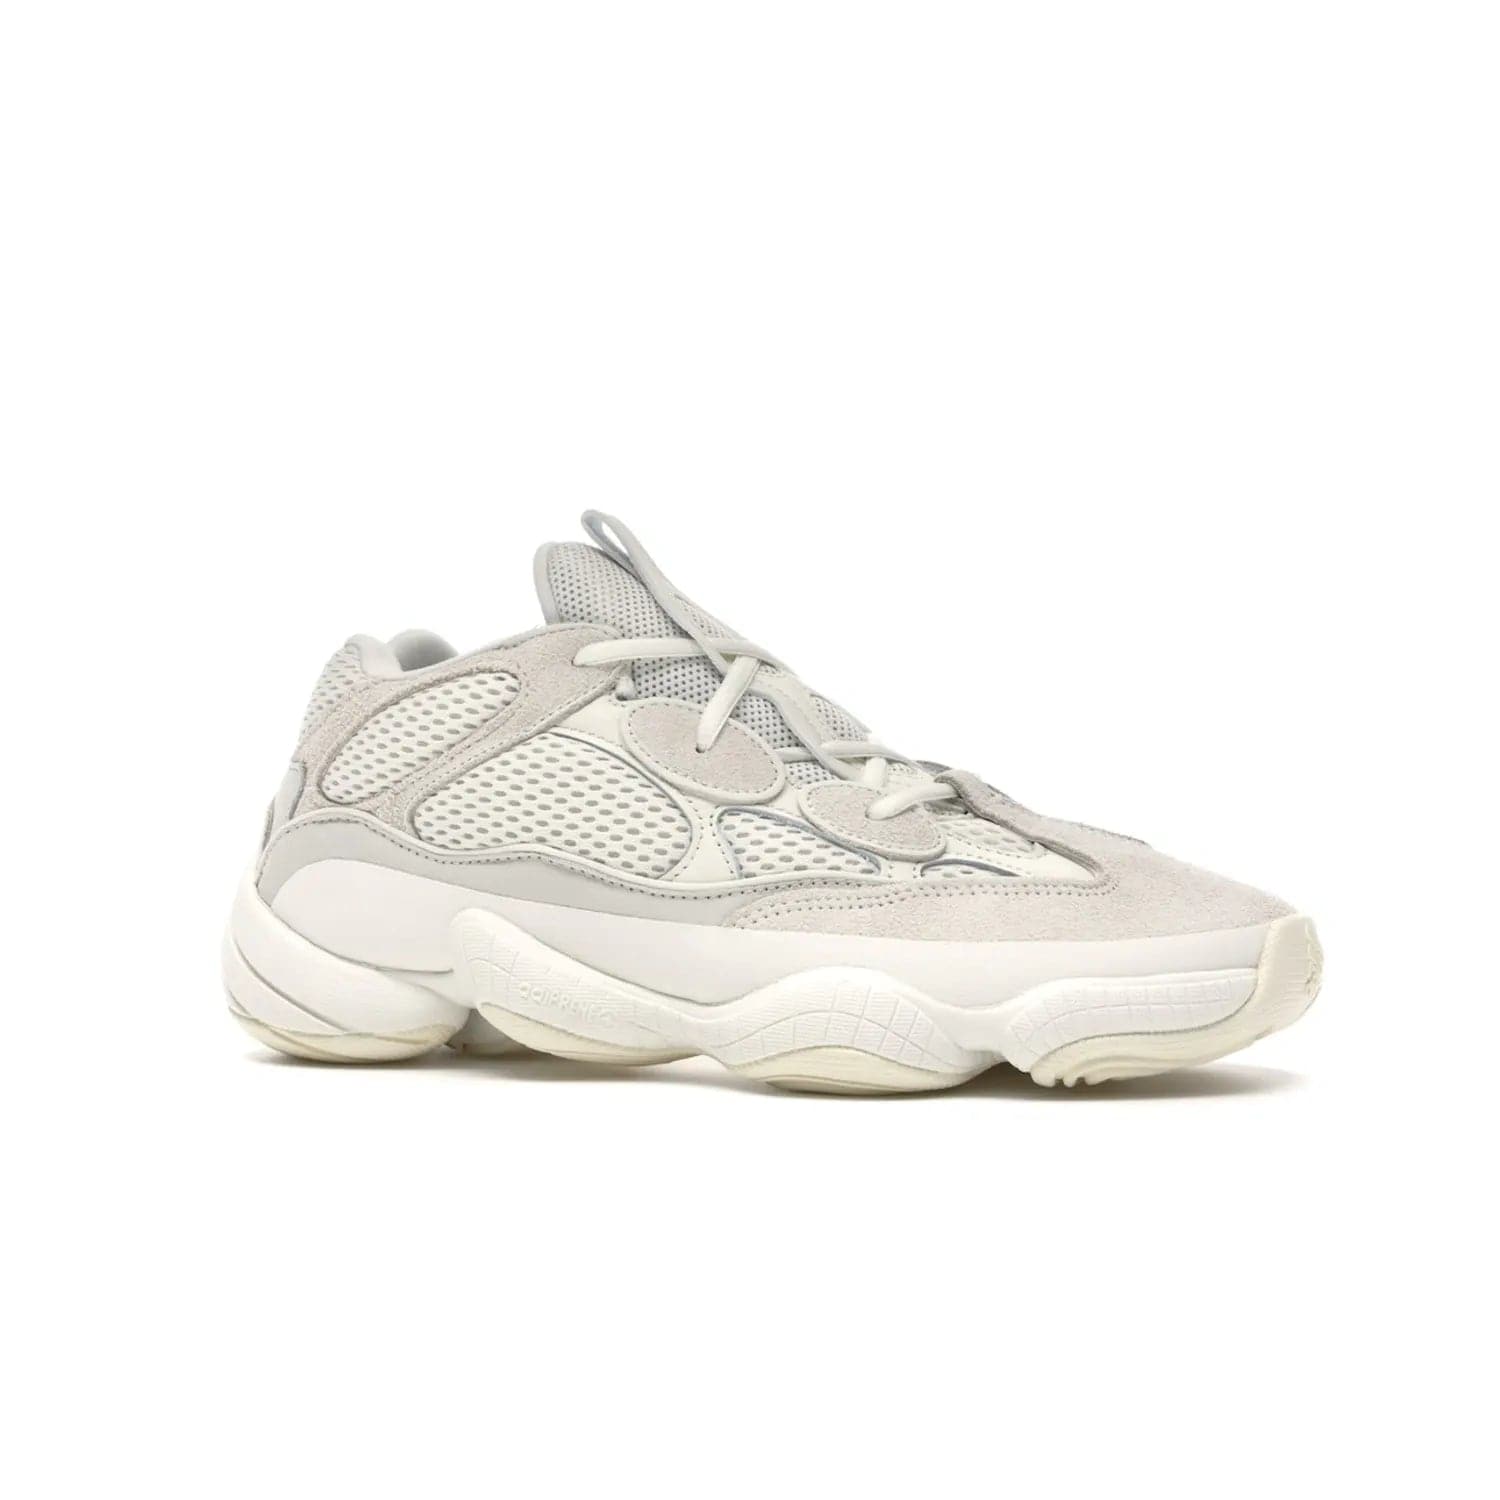 adidas Yeezy 500 Bone White - Image 3 - Only at www.BallersClubKickz.com - Classic look perfect for any sneaker collection. The adidas Yeezy 500 "Bone White" blends a white mesh upper with suede overlays & a chunky midsole inspired by the Adidas KB3. Complimented by a tonal-cream outsole, this timeless style is a must-have.